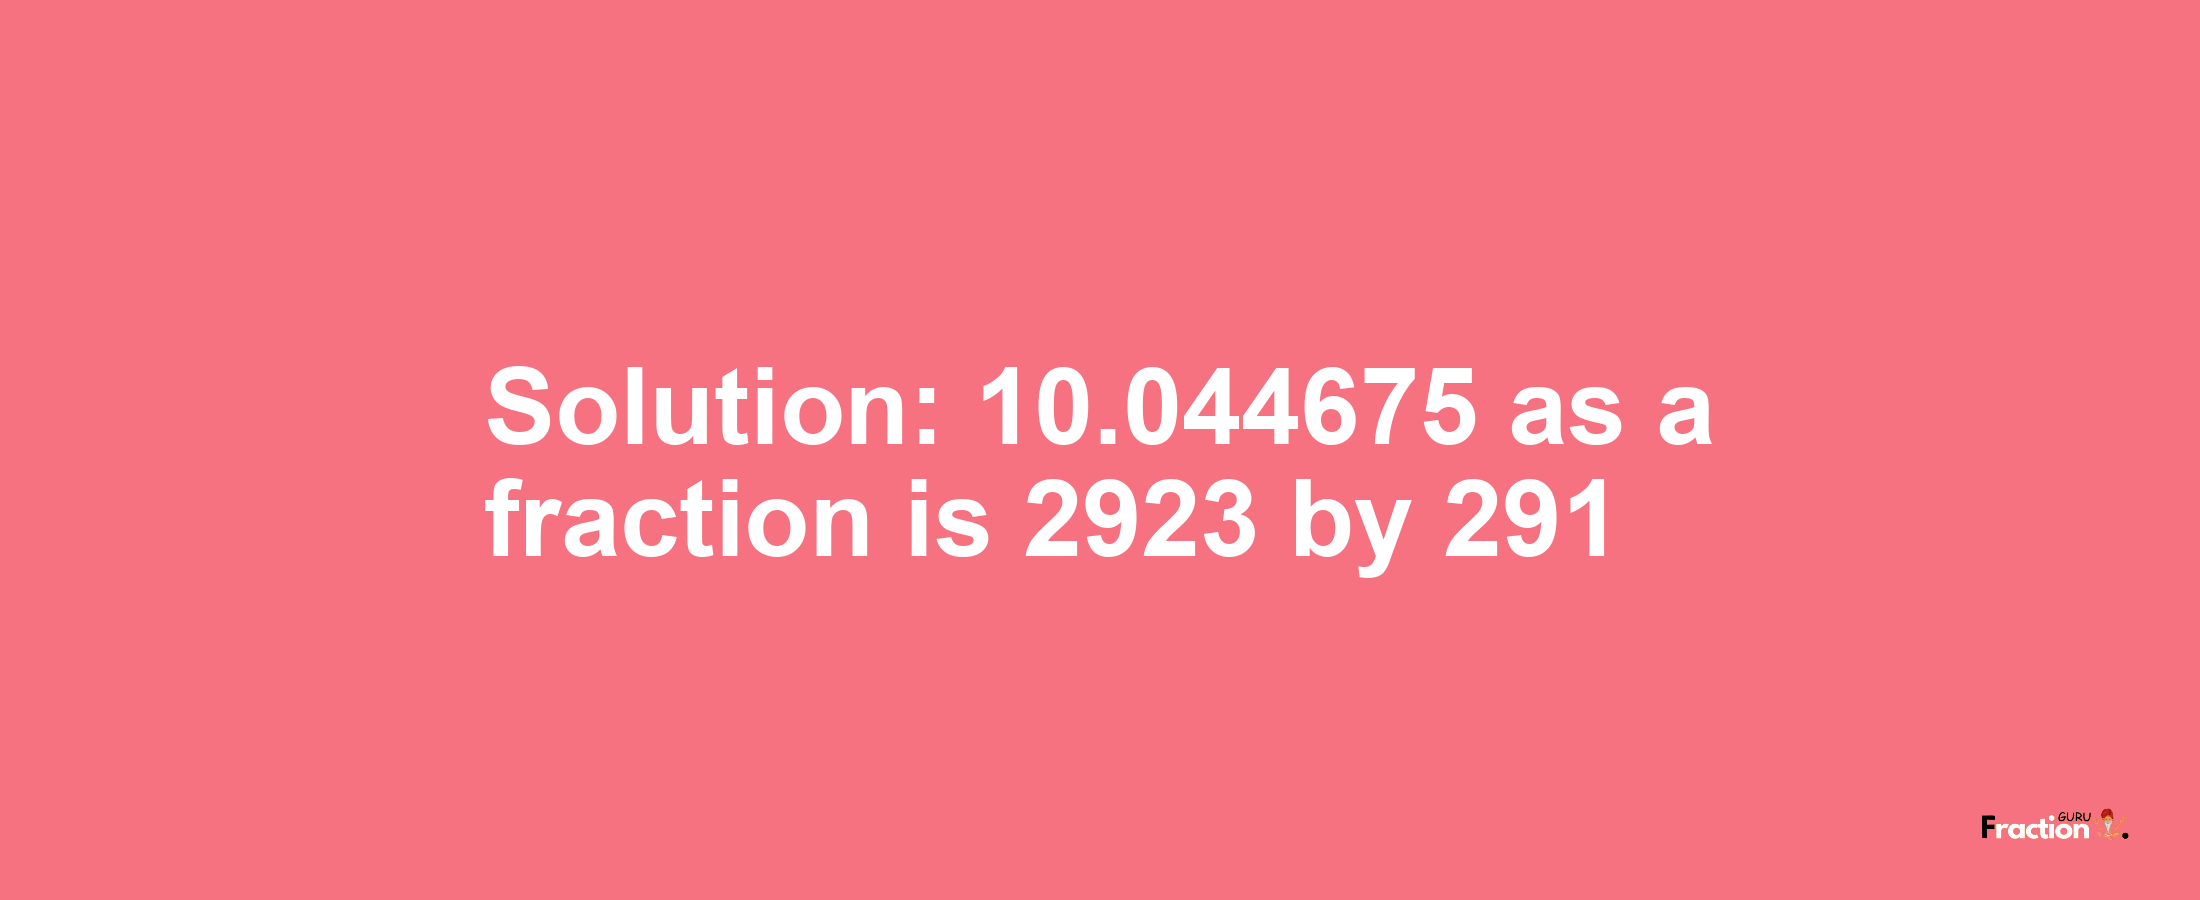 Solution:10.044675 as a fraction is 2923/291